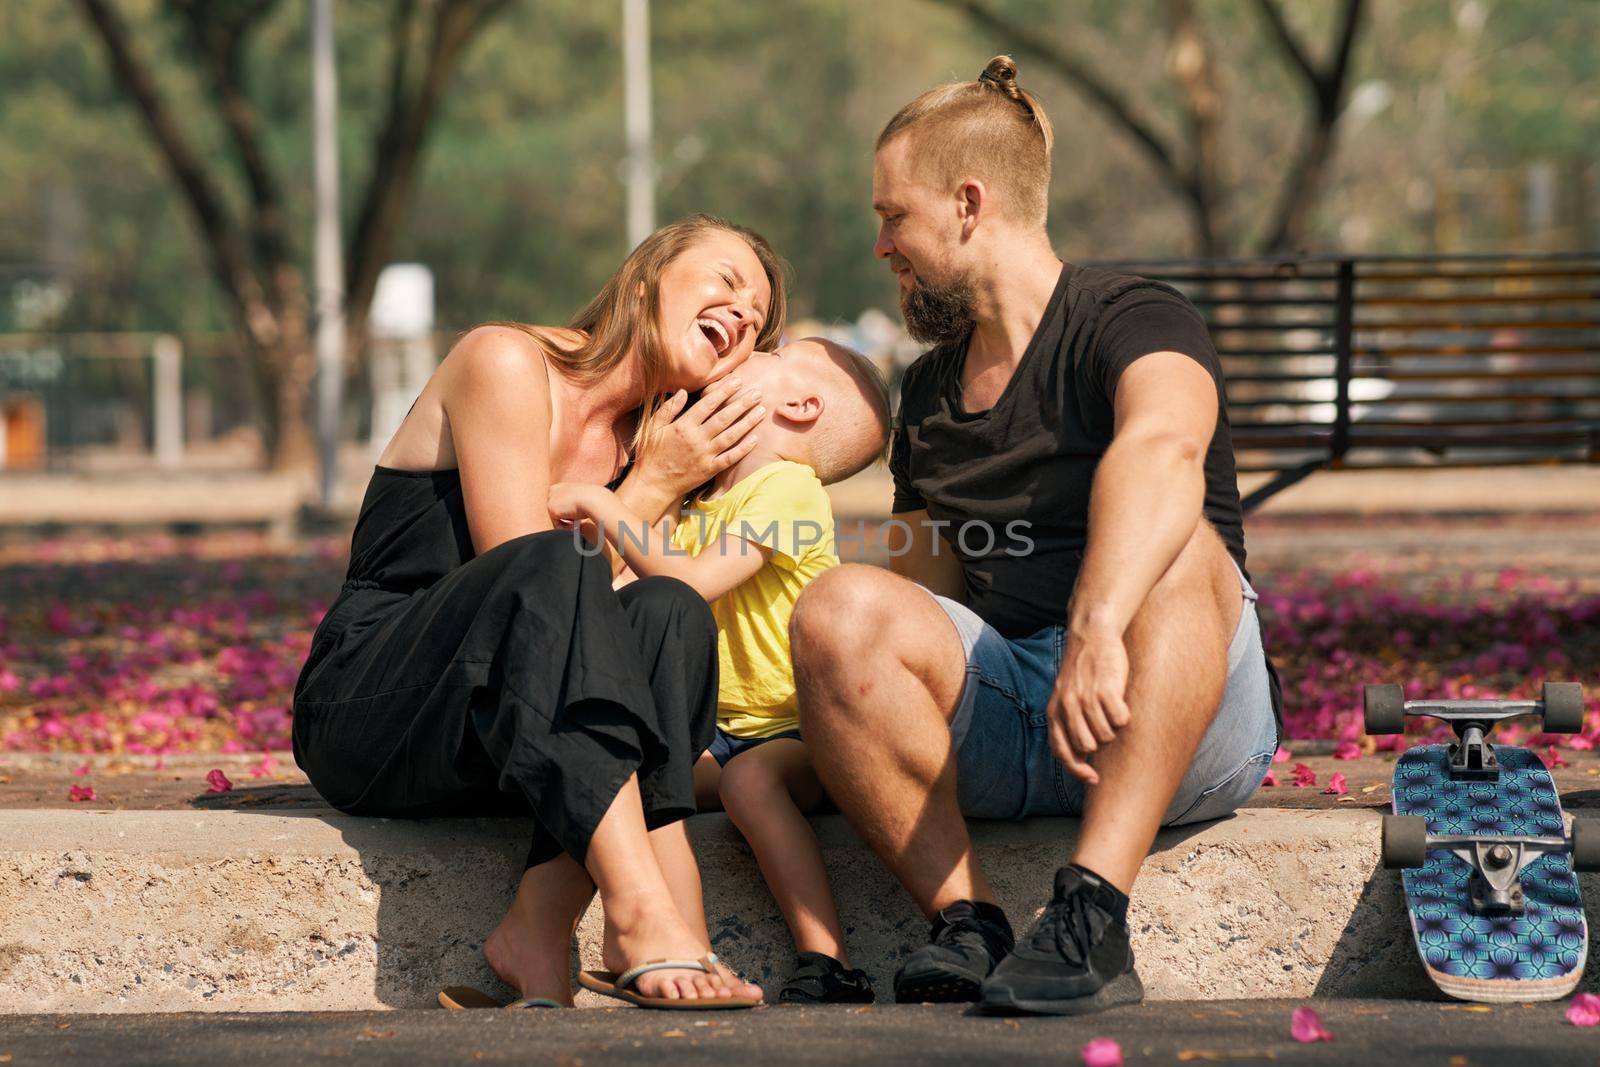 Closeup portrait father, mother is hugging their little son while sitting in skate park with blossom trees around. Concept of happy family love and care. Outdoor leisure and activity.